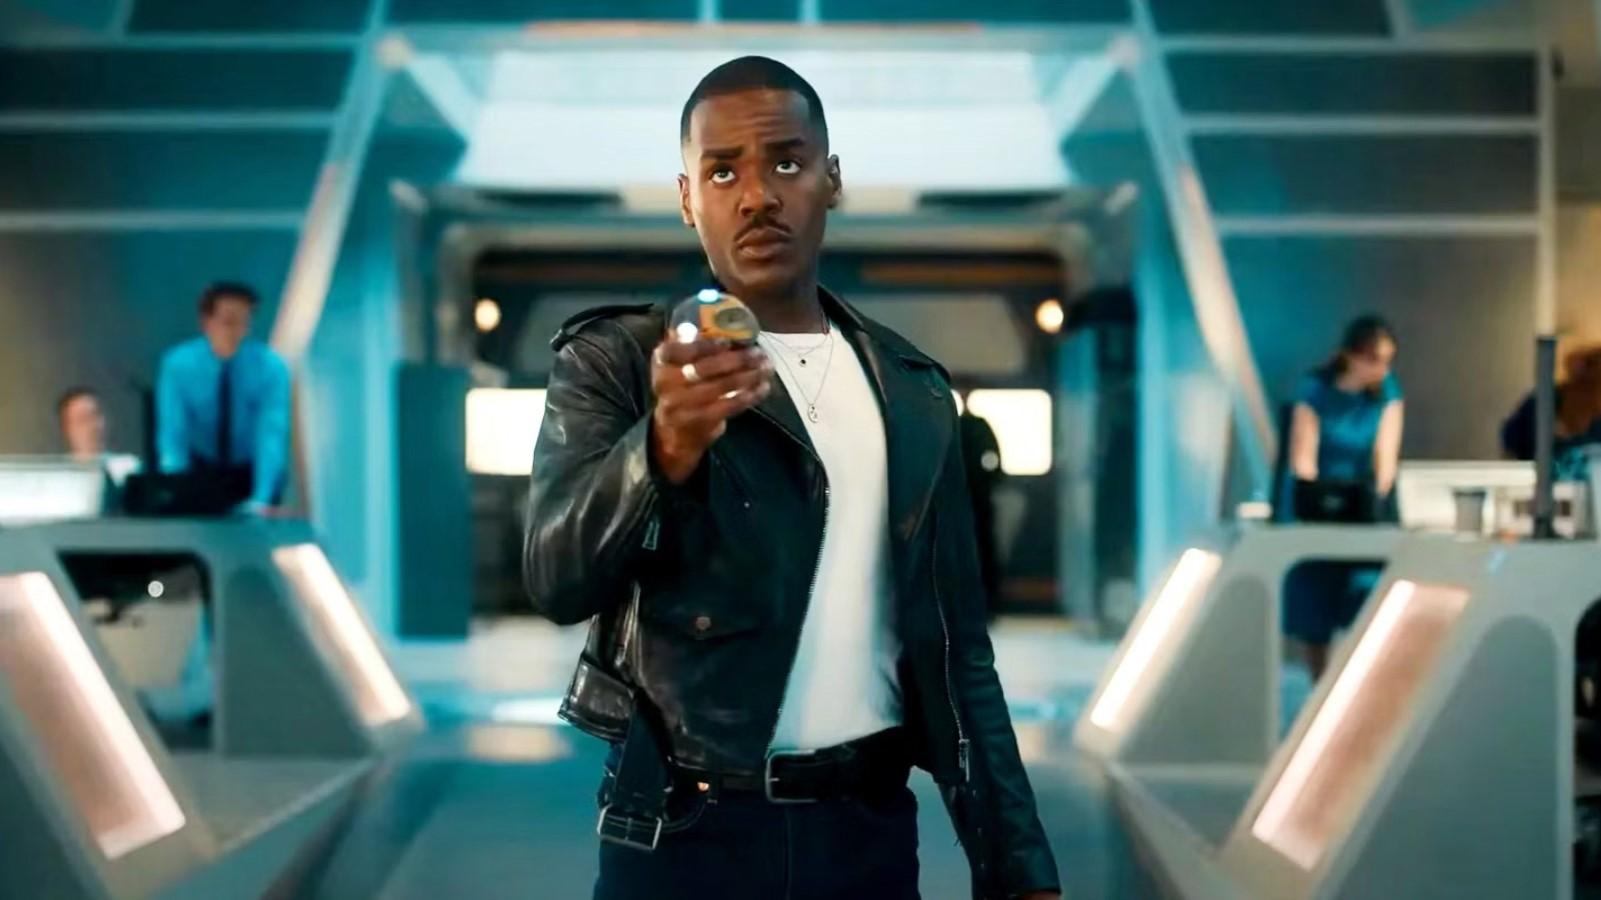 Ncuti Gatwa as the Doctor, holding up his sonic screwdriver